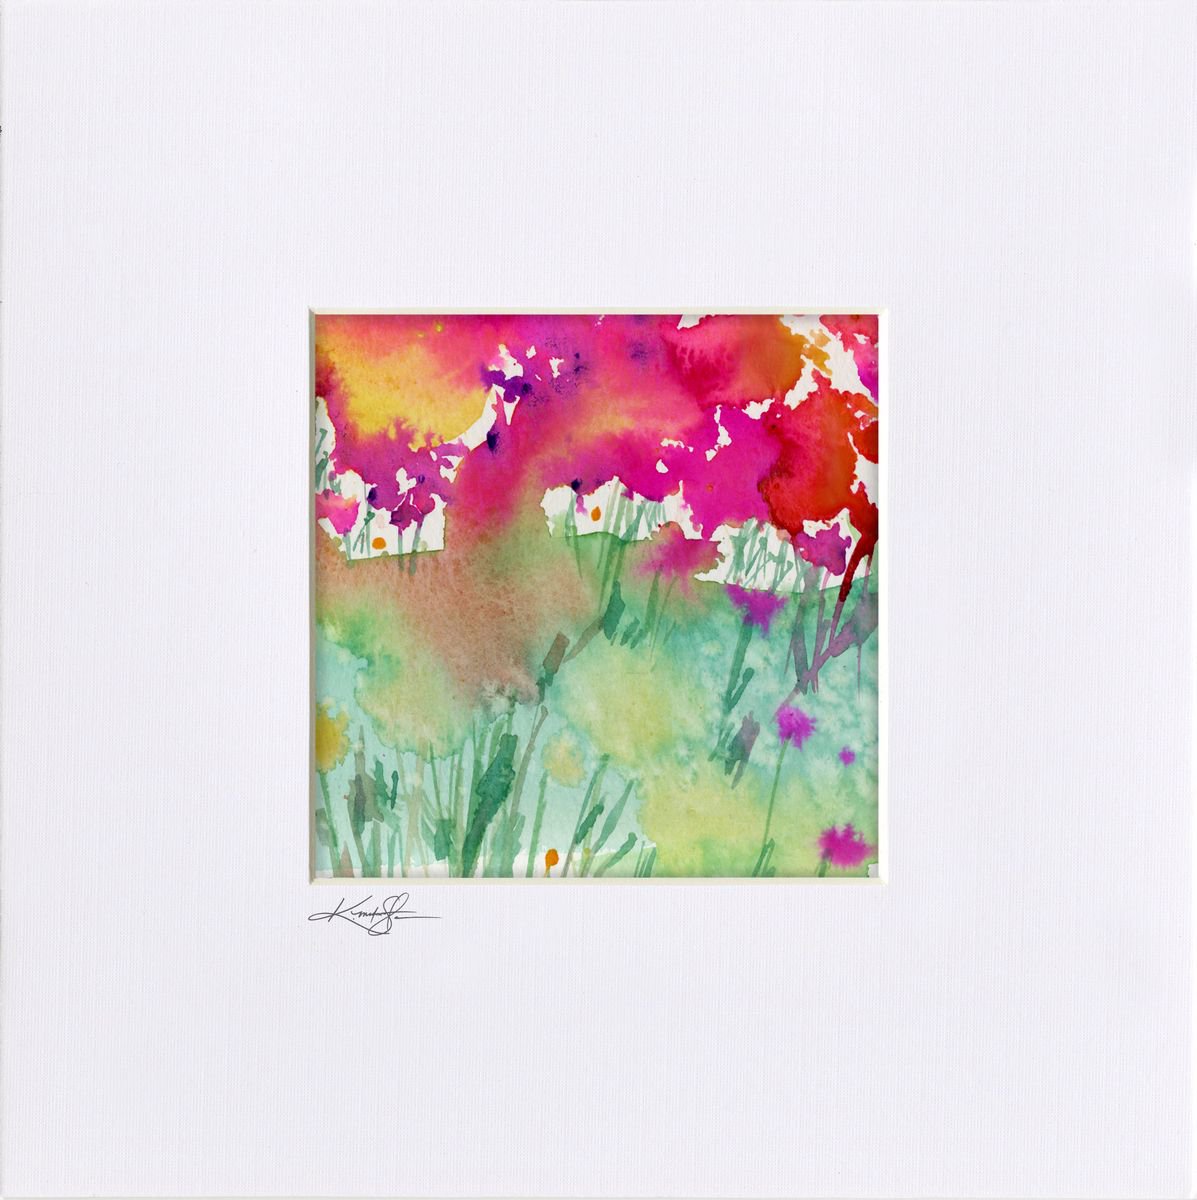 A Walk Among The Flowers 11 - Abstract Floral Watercolor painting by Kathy Morton Stanion by Kathy Morton Stanion